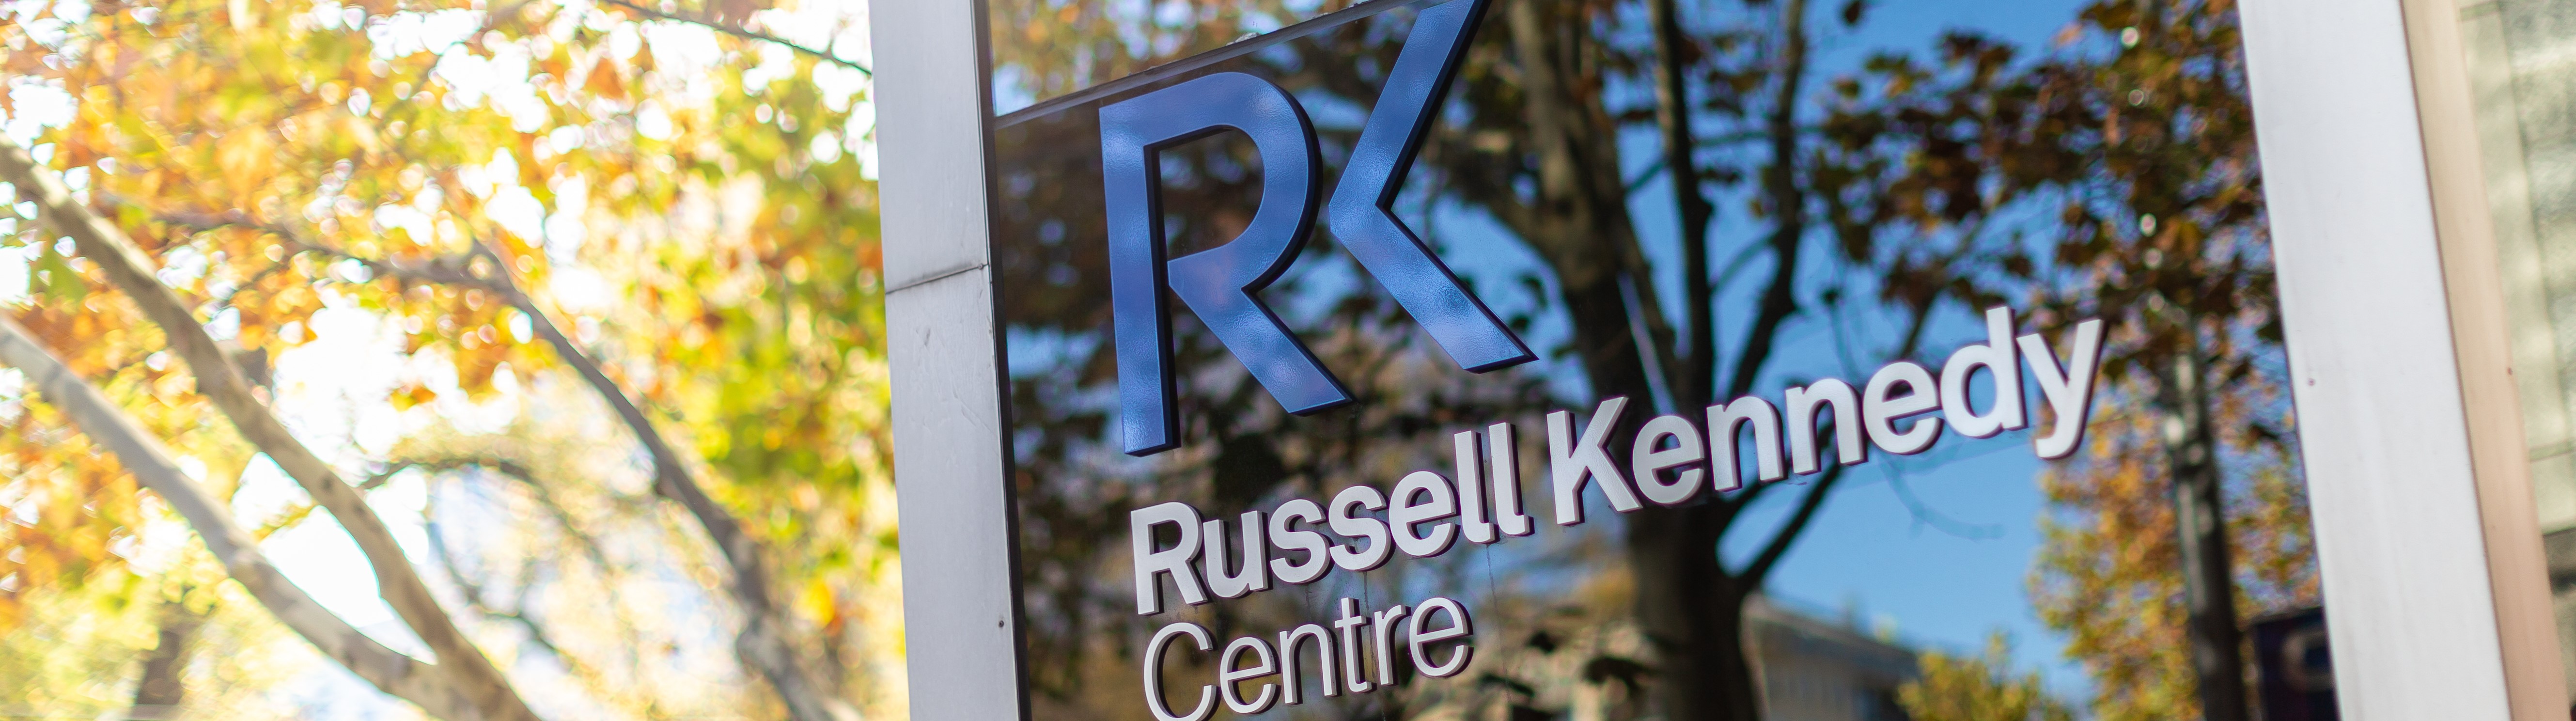 Russell Kennedy Signage 4 banner